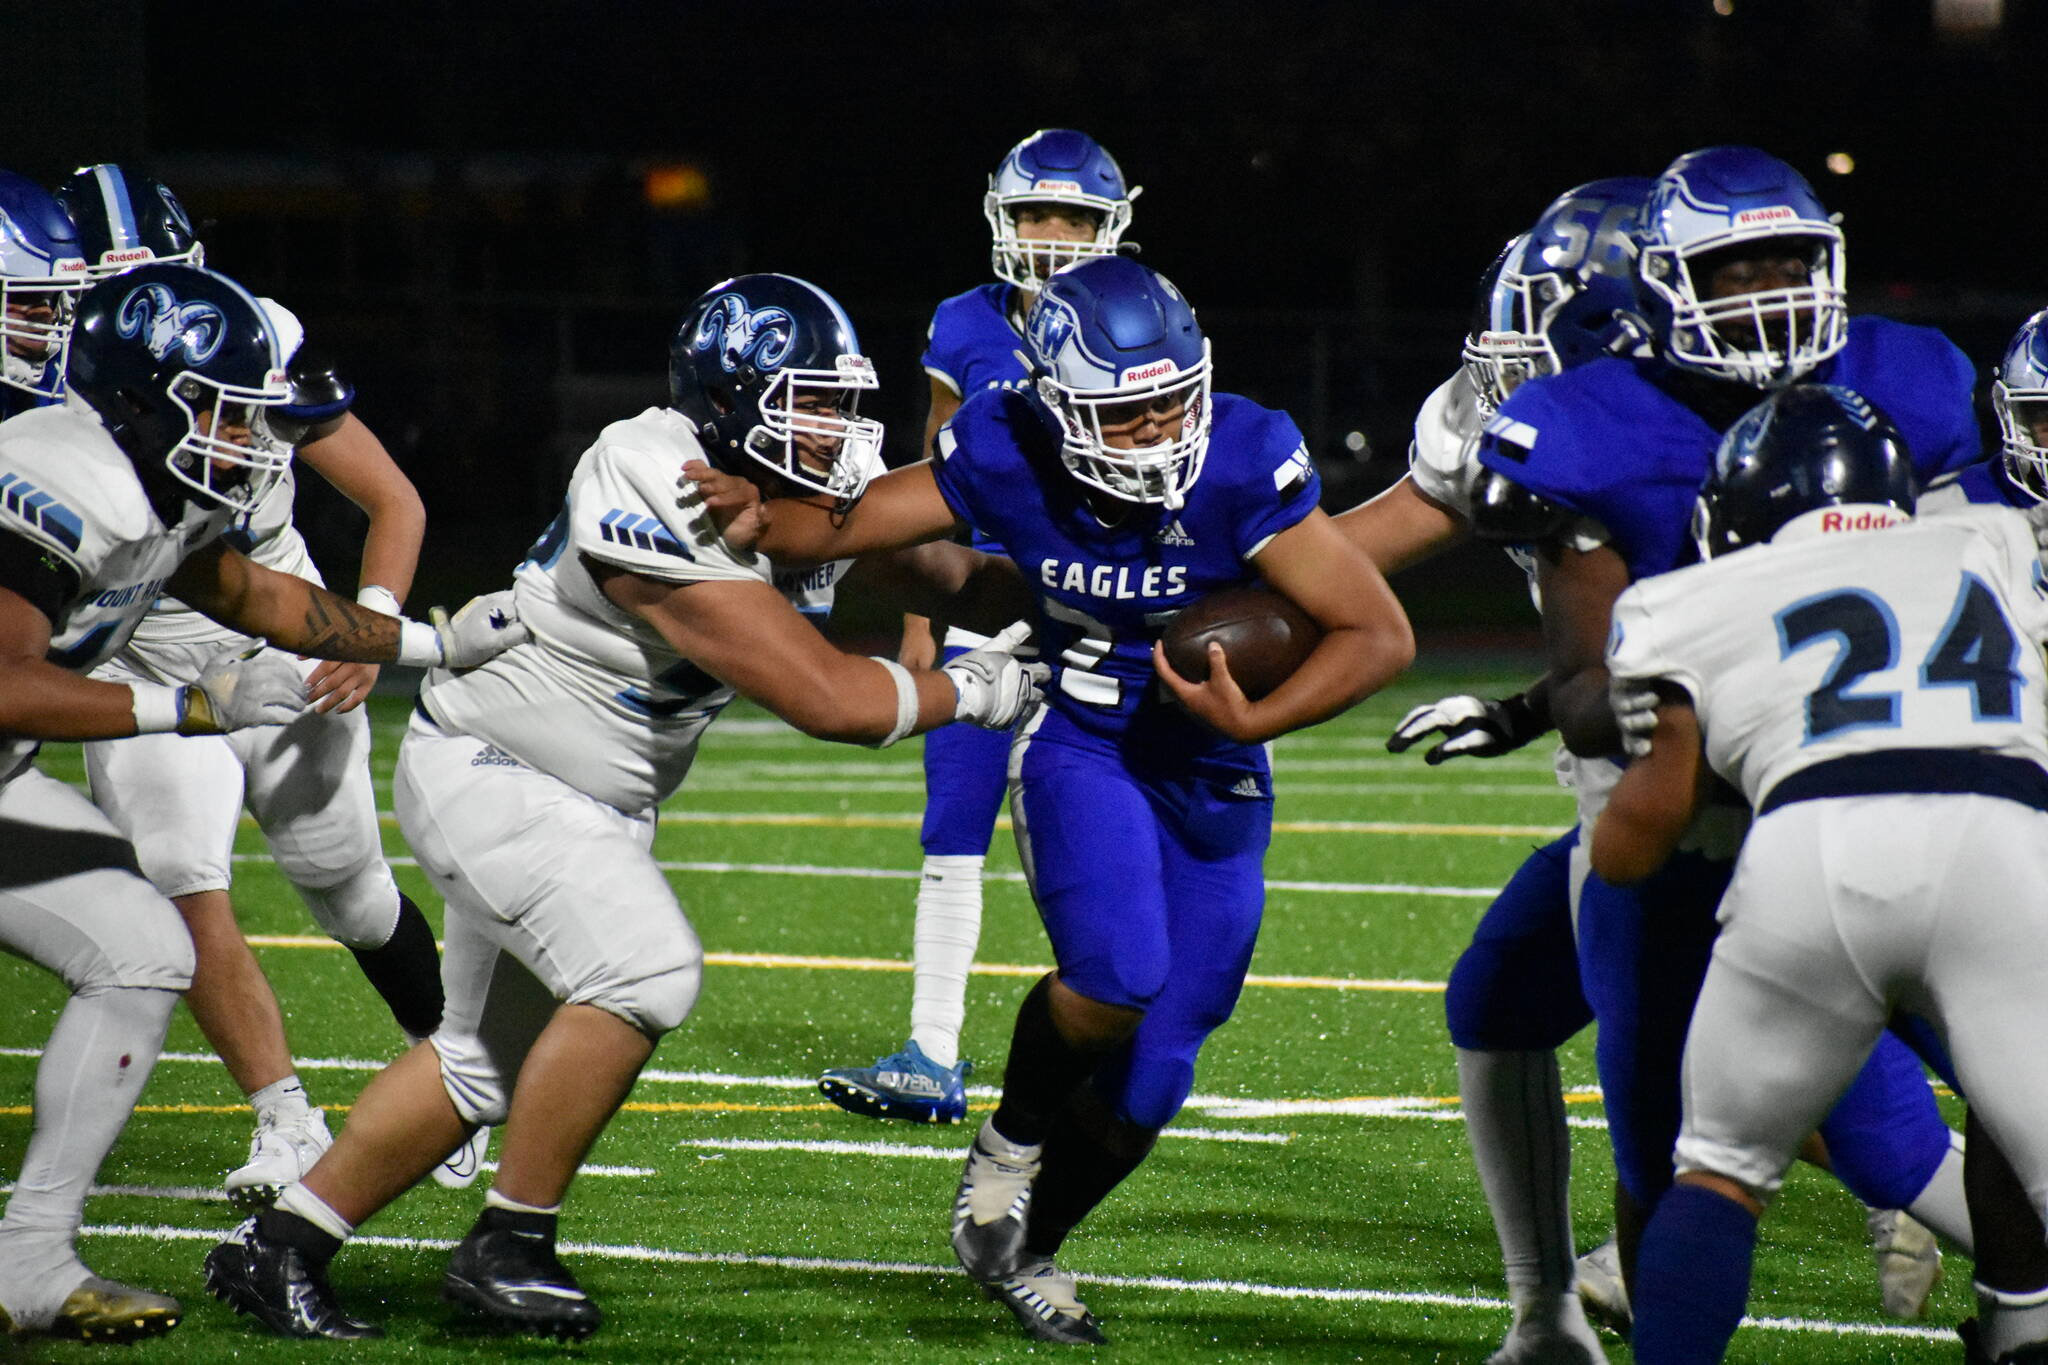 Federal Way’s Sione Kongaika stiff-arms a defender. (Ben Ray/Sound Publishing)